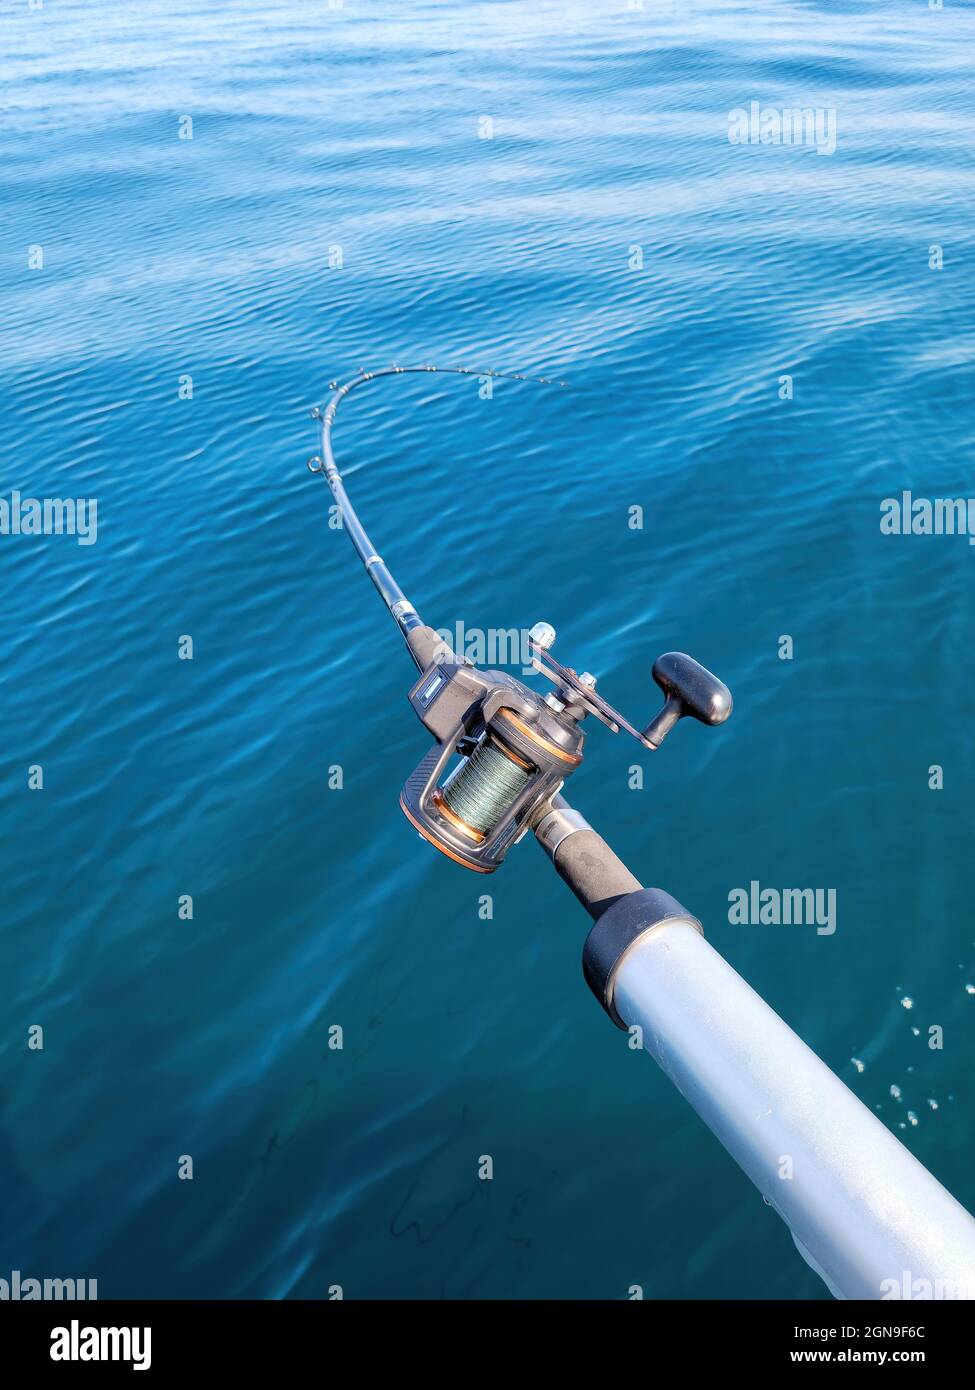 Fishing pole with reel in blue lake water Stock Photo - Alamy